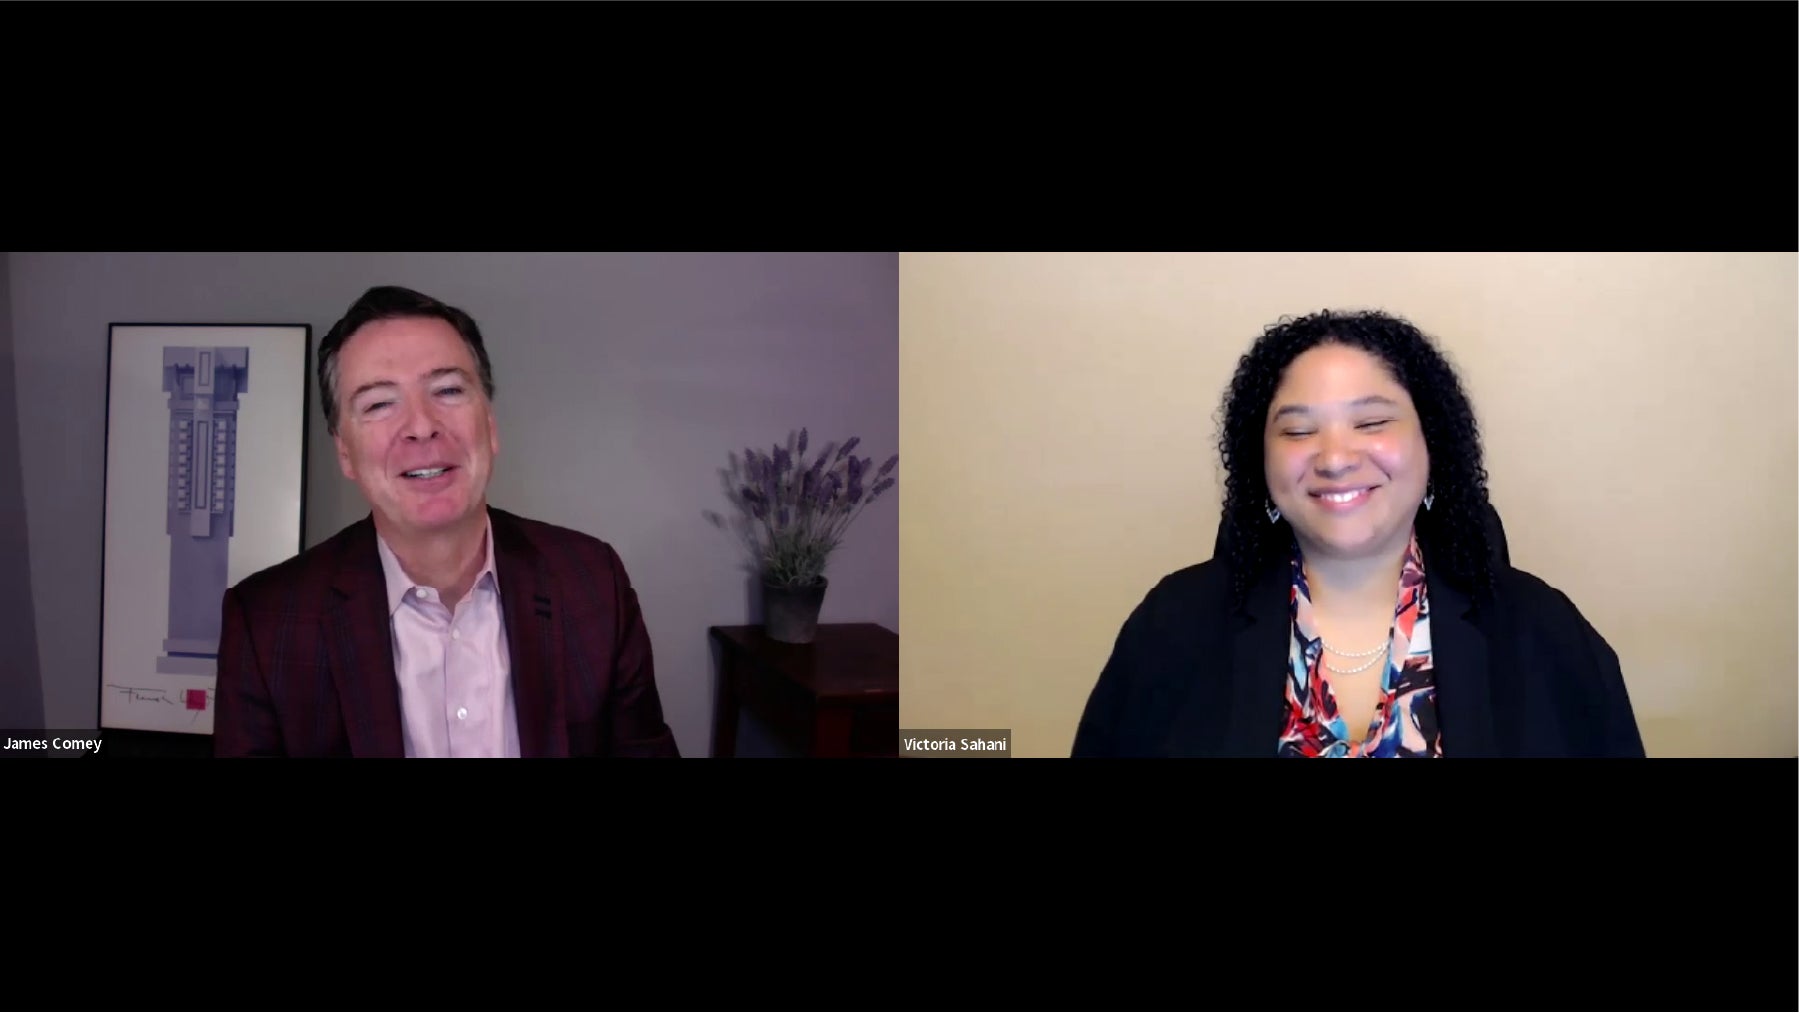 James Comey and Victoria Sahani on zoom for Schiefelbein Global Dispute Resolution Conference